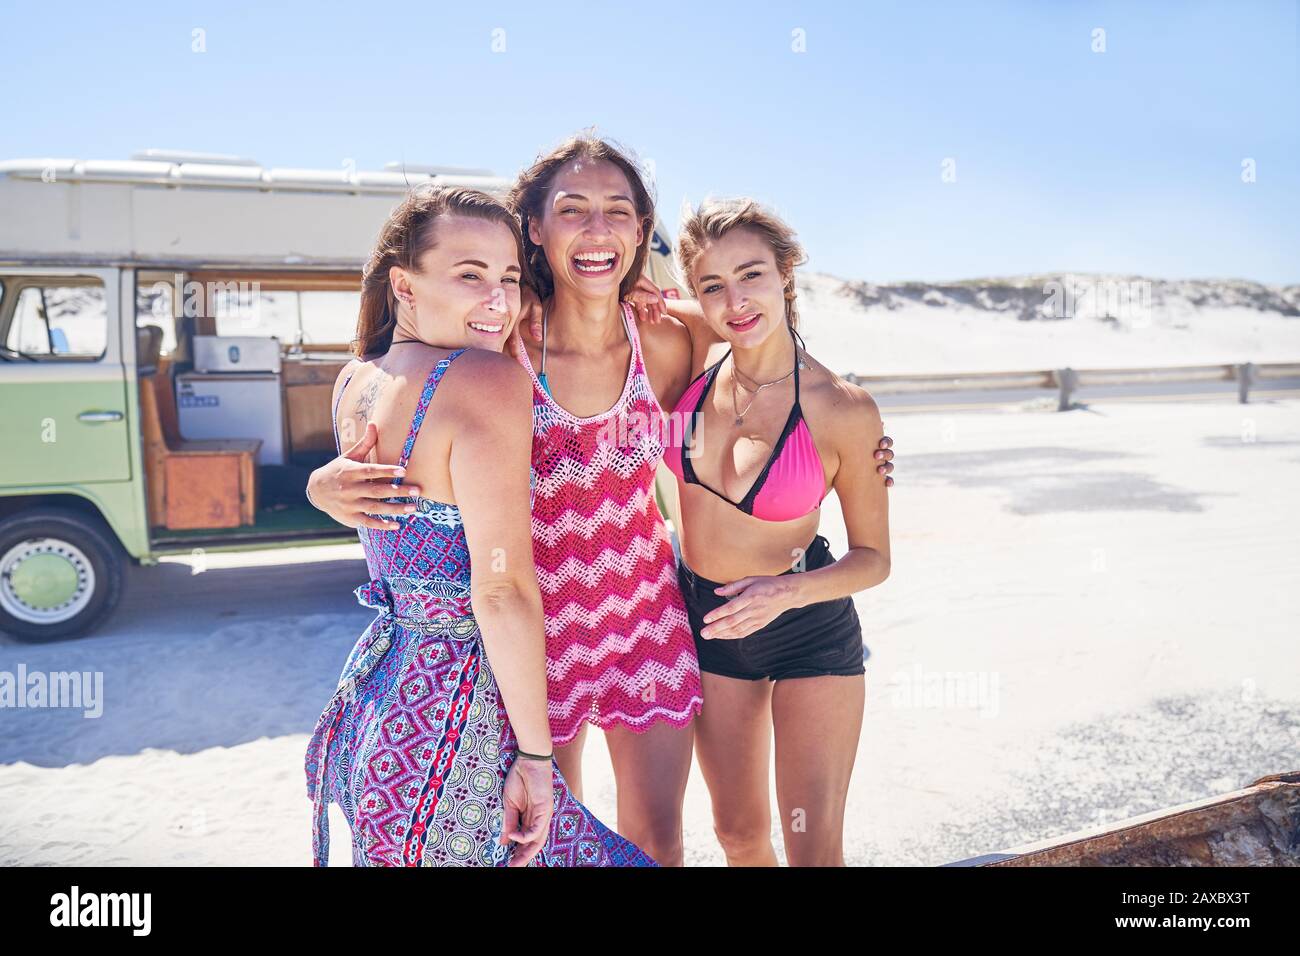 Portrait carefree young women friends on sunny summer beach Stock Photo